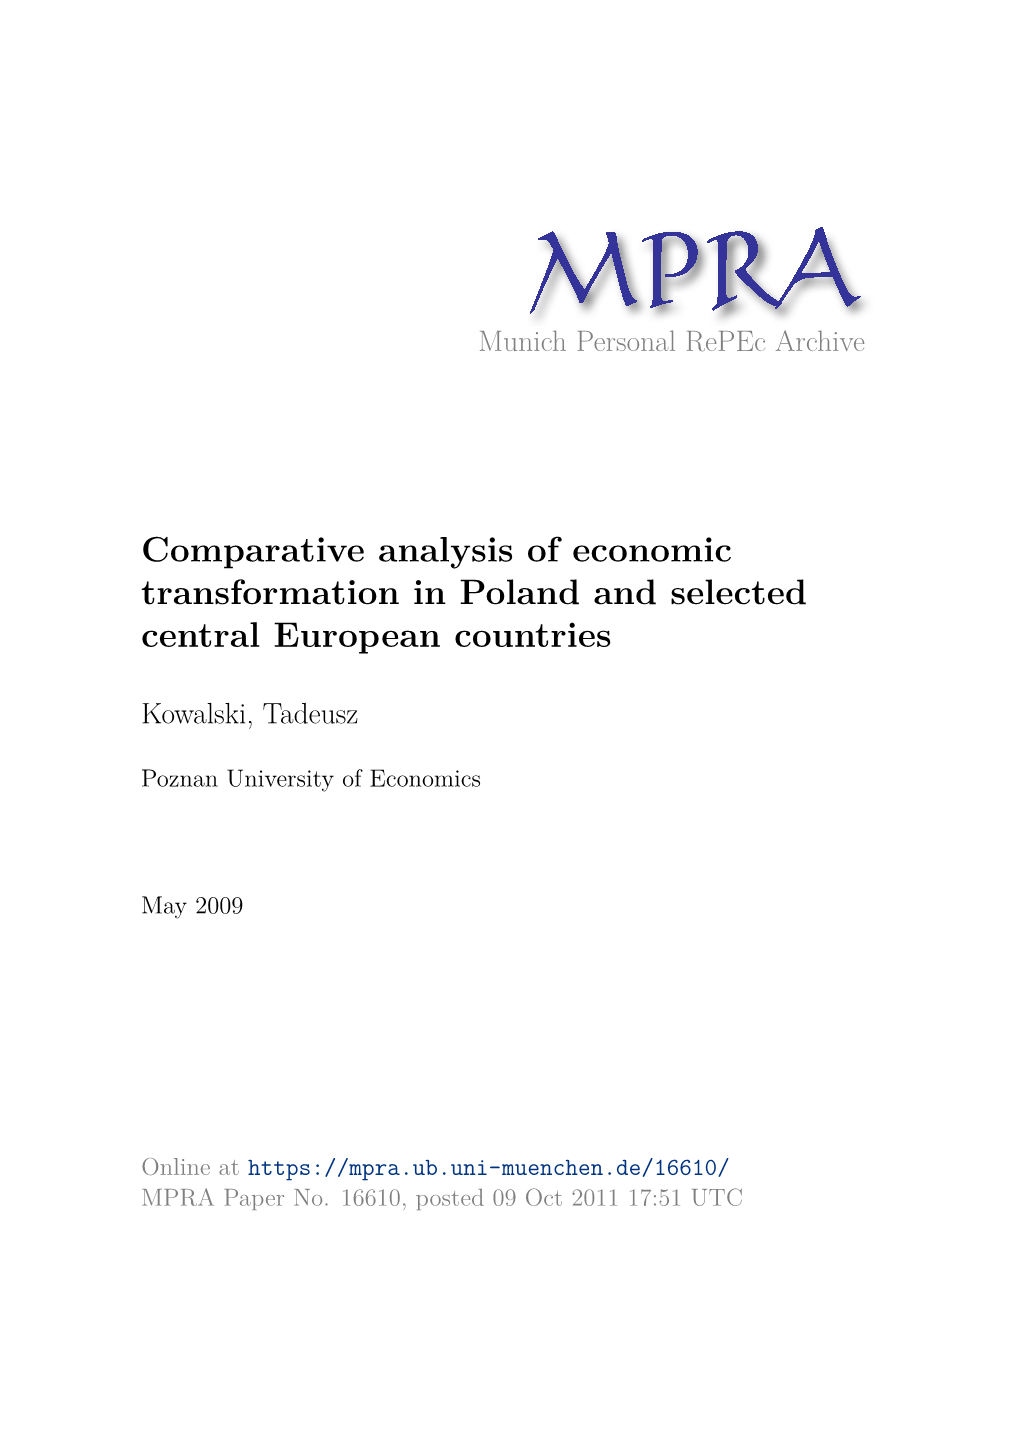 Comparative Analysis of Economic Transformation in Poland and Selected Central European Countries